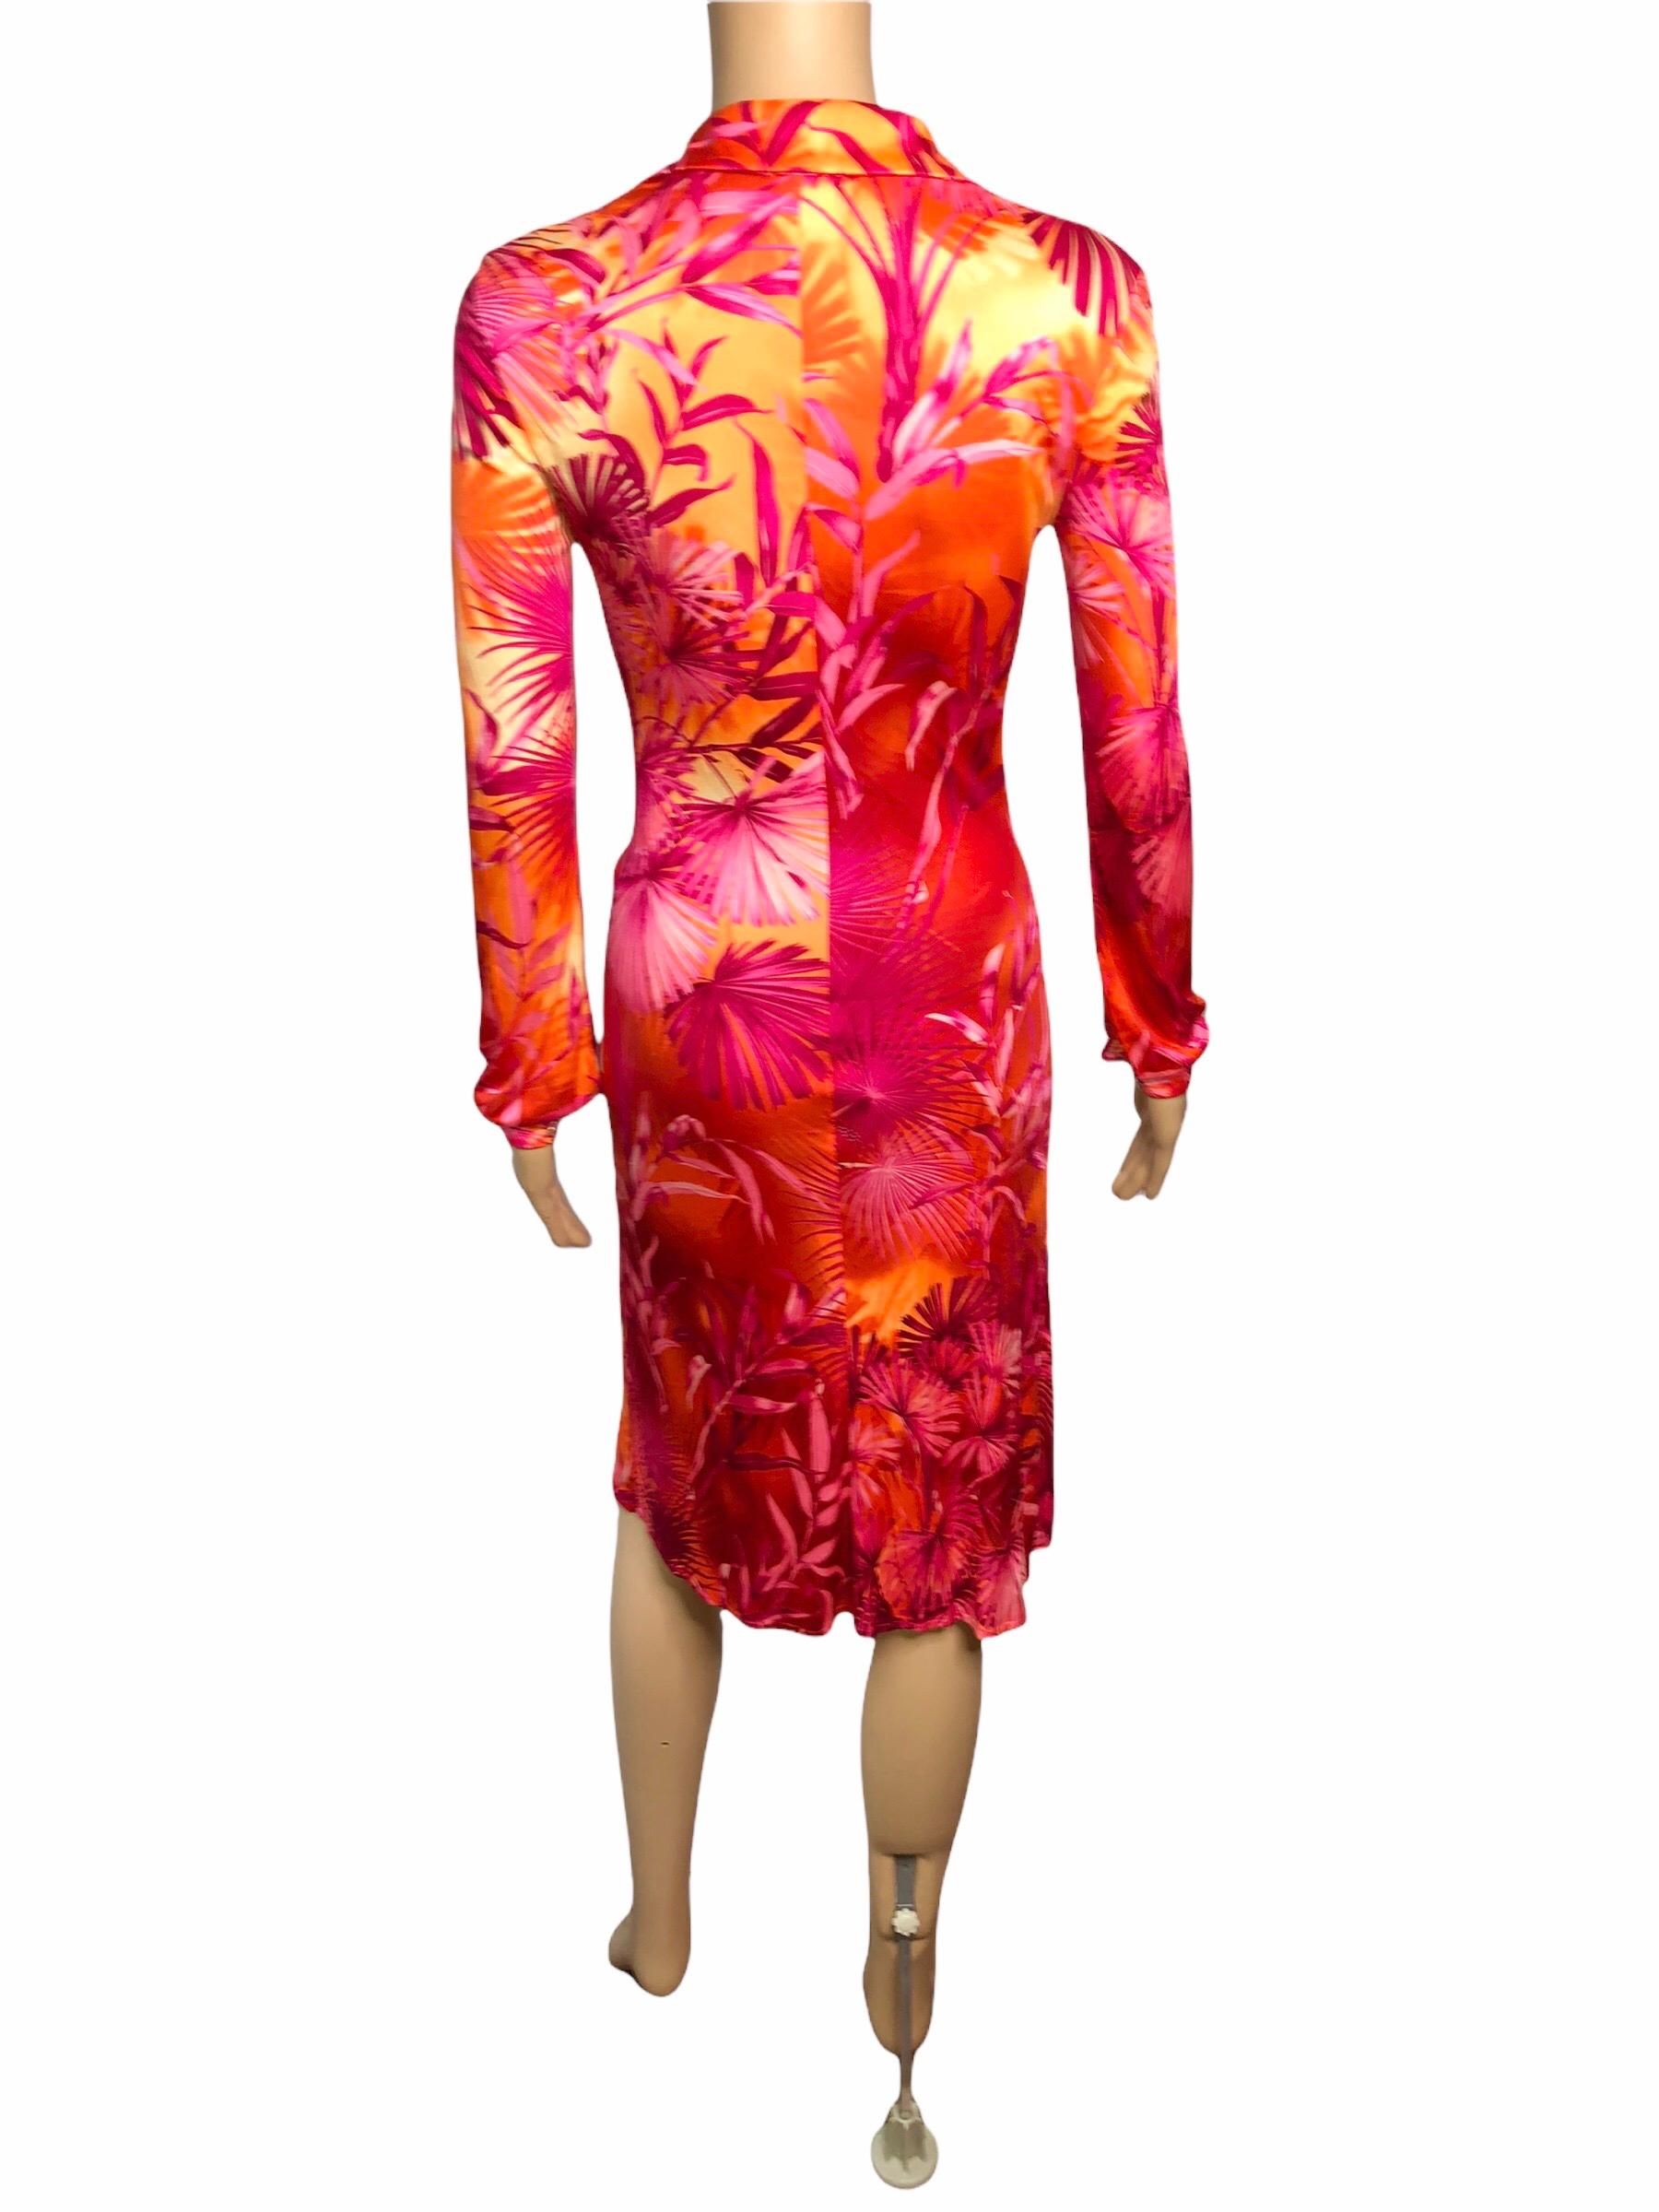 Gianni Versace Runway S/S 2000 Vintage Tropical Print Plunging Neckline Dress For Sale 1